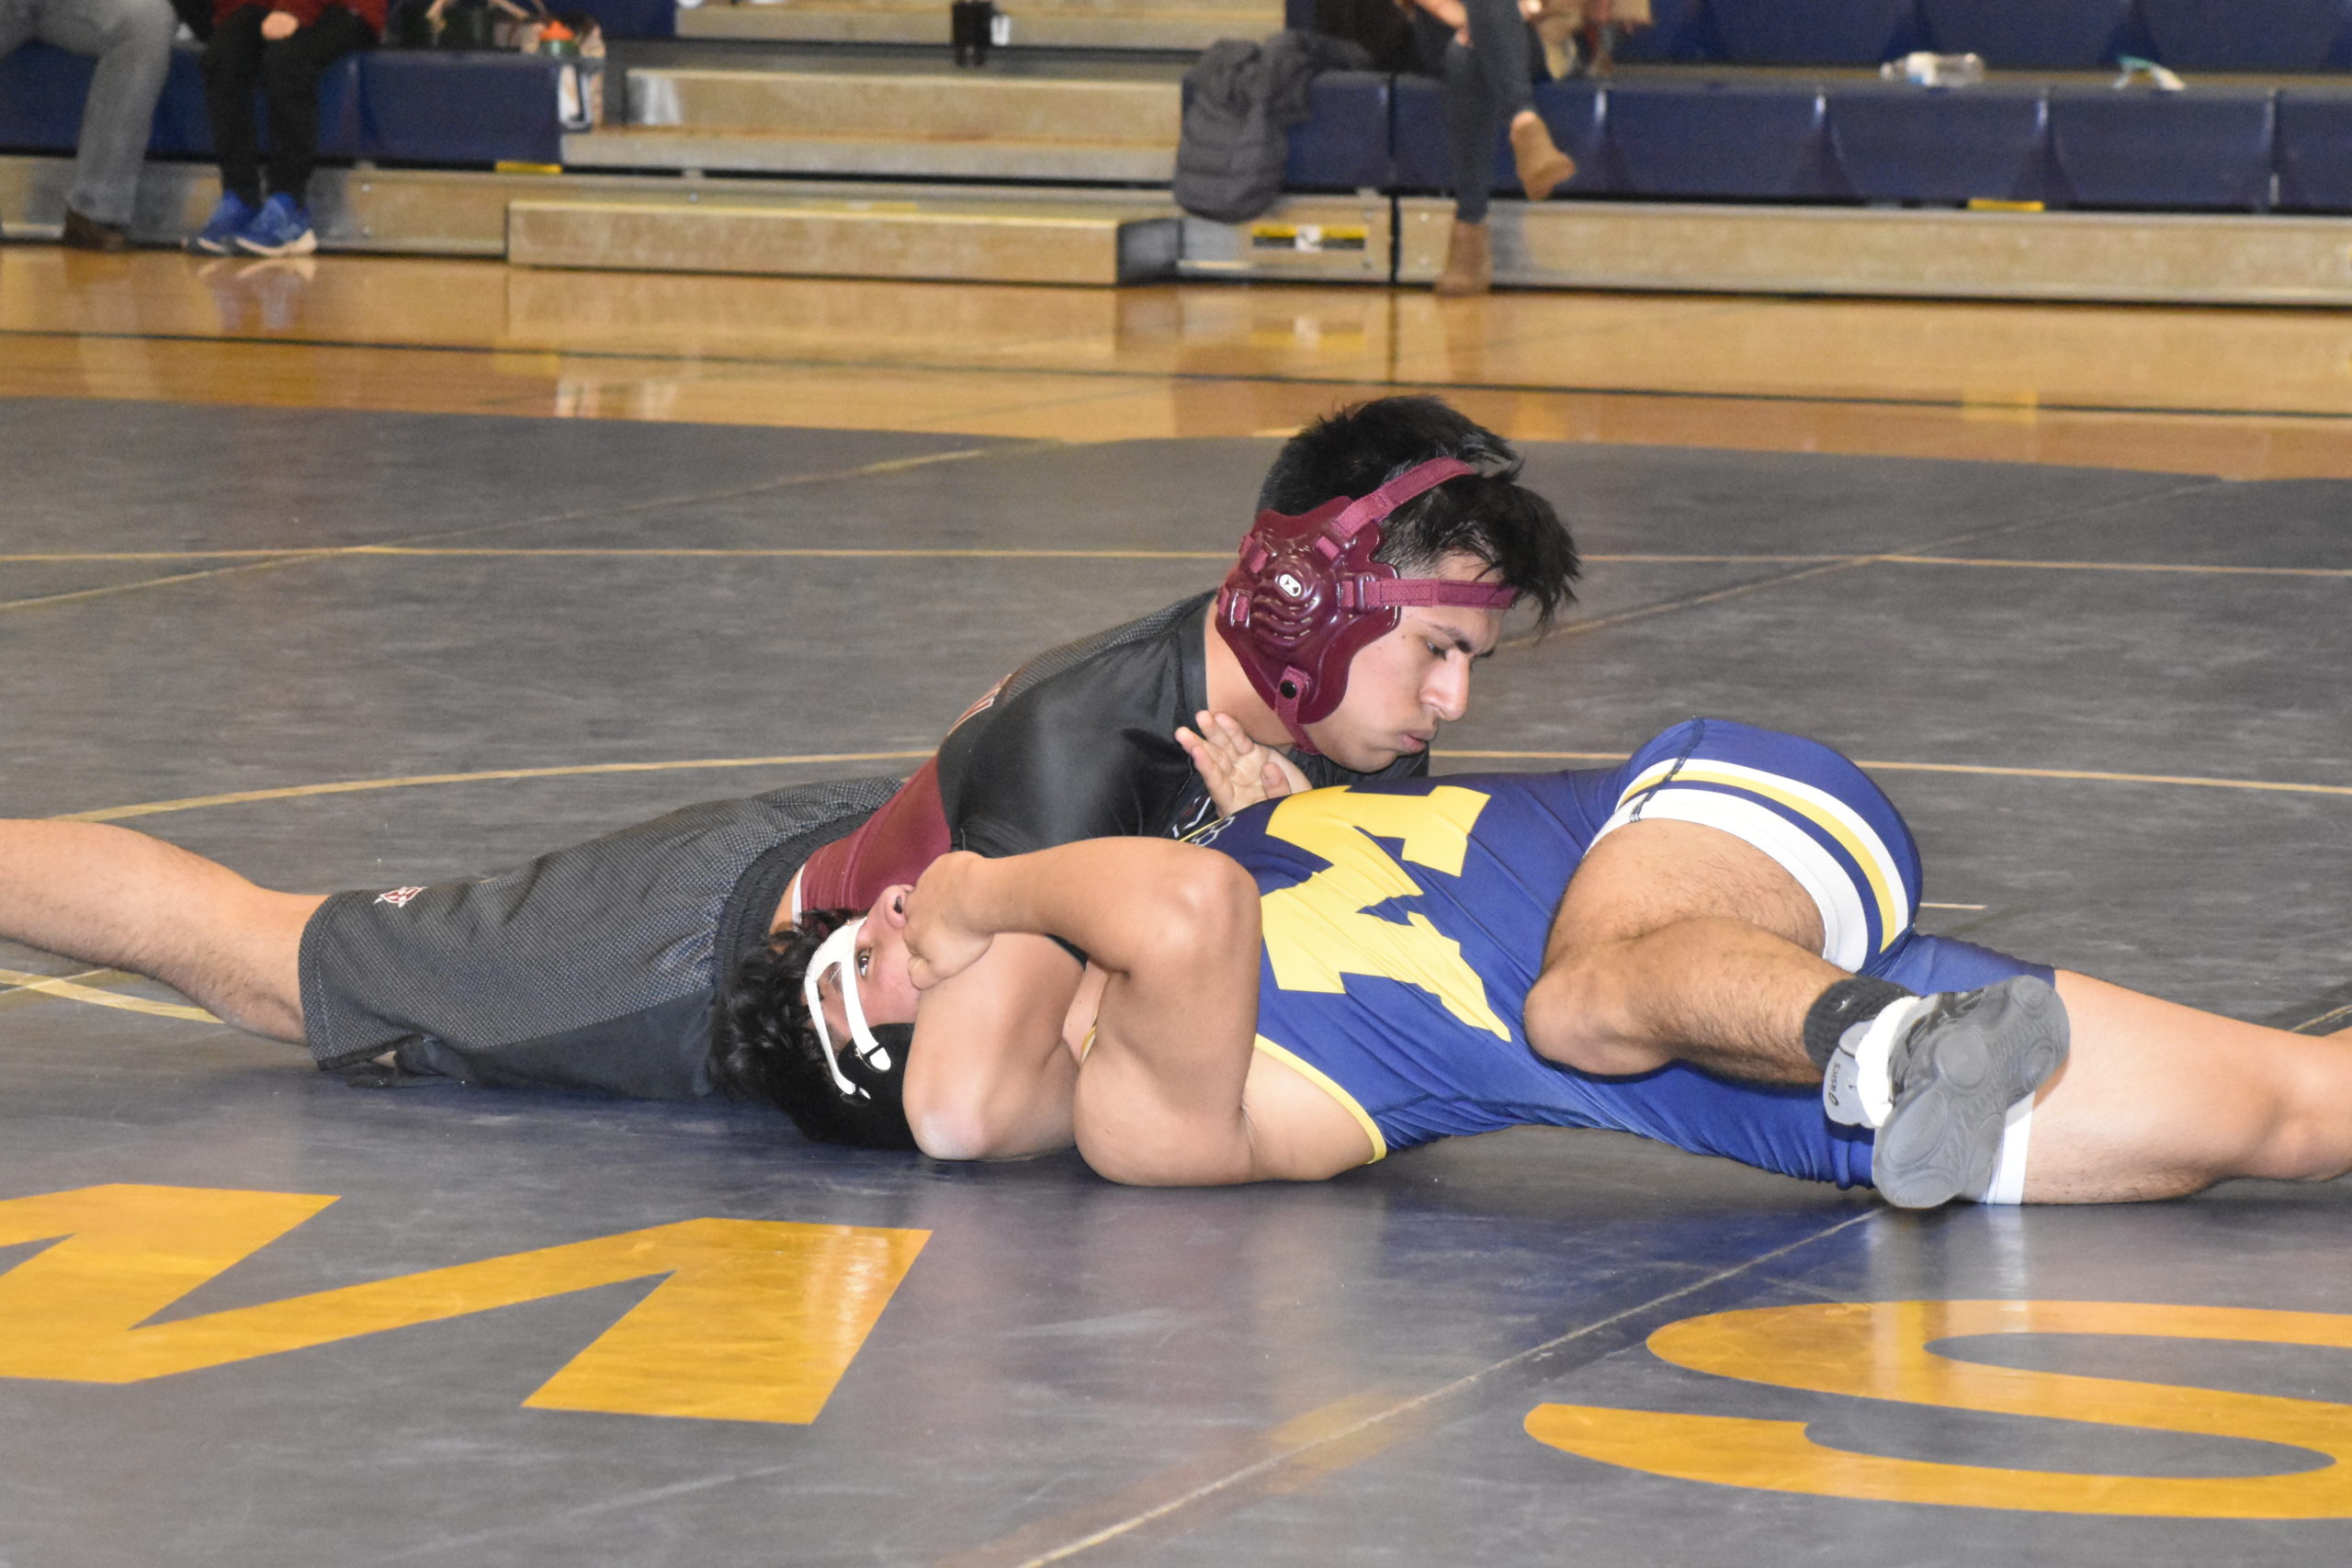 Luis Tlapanco picked up a big pin for the Mariners last week, when he was able to get Mattituck's Christian Ardiano on his back.